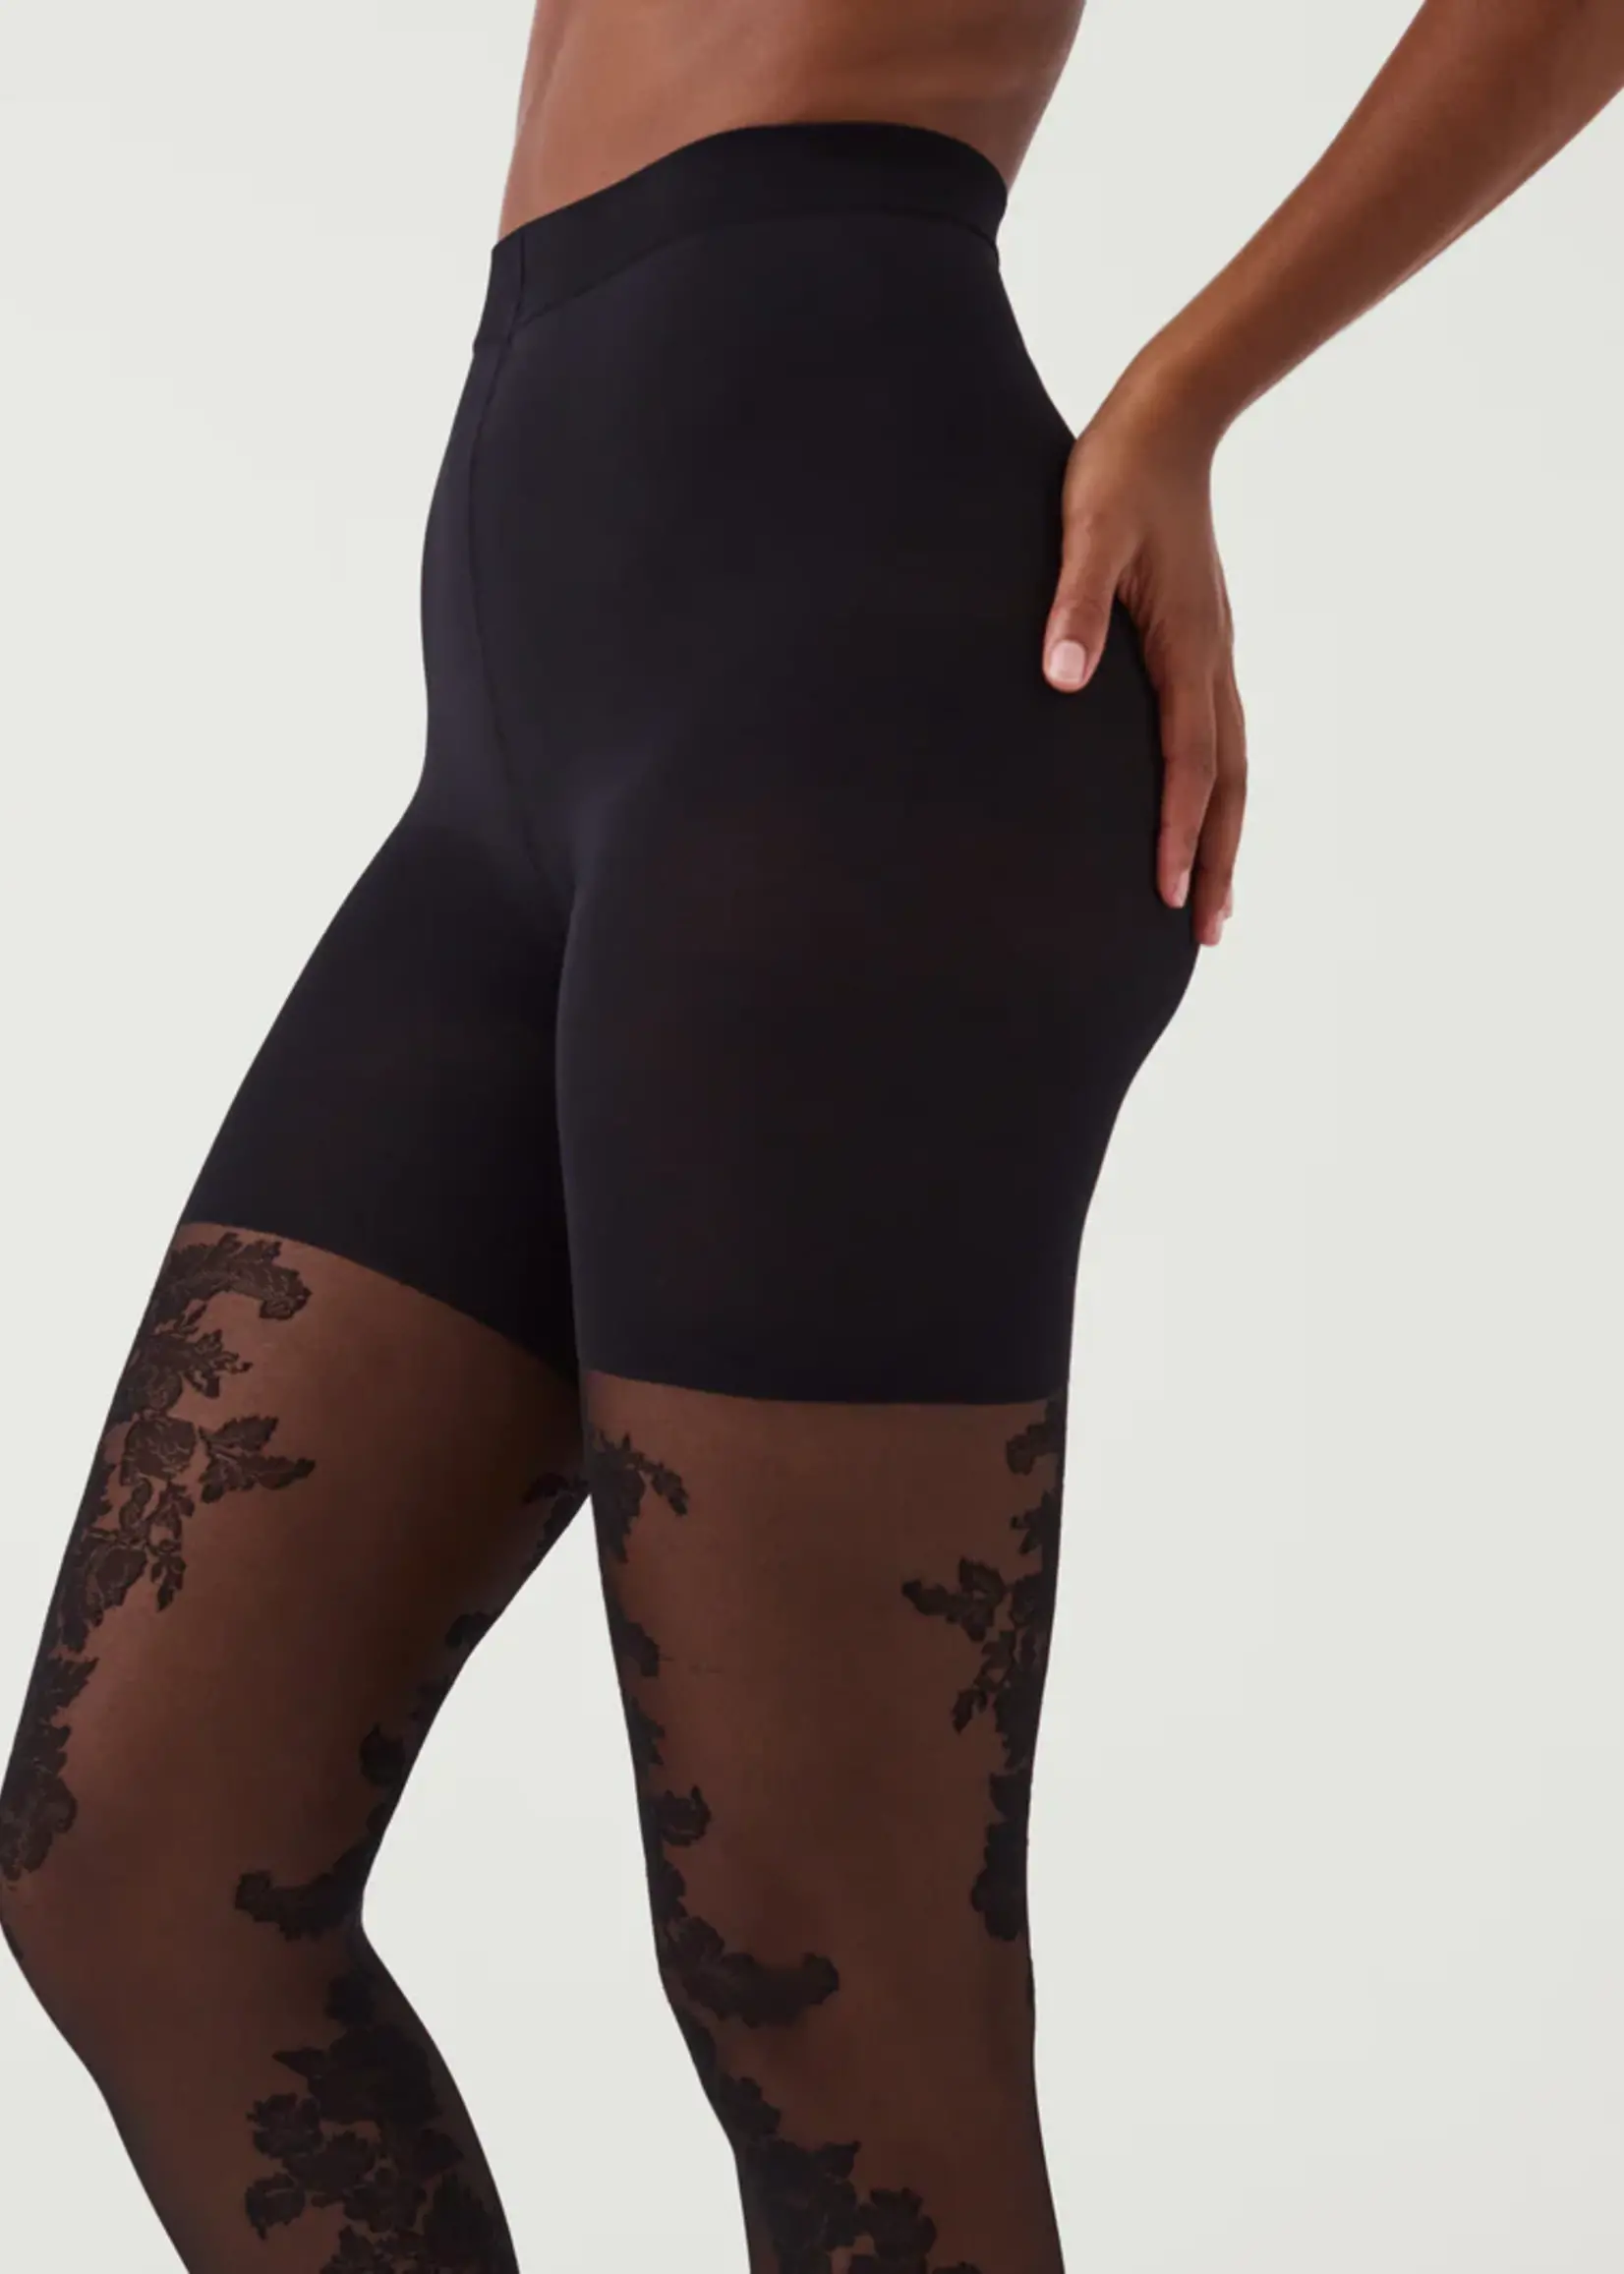 SPANX Floral Tights